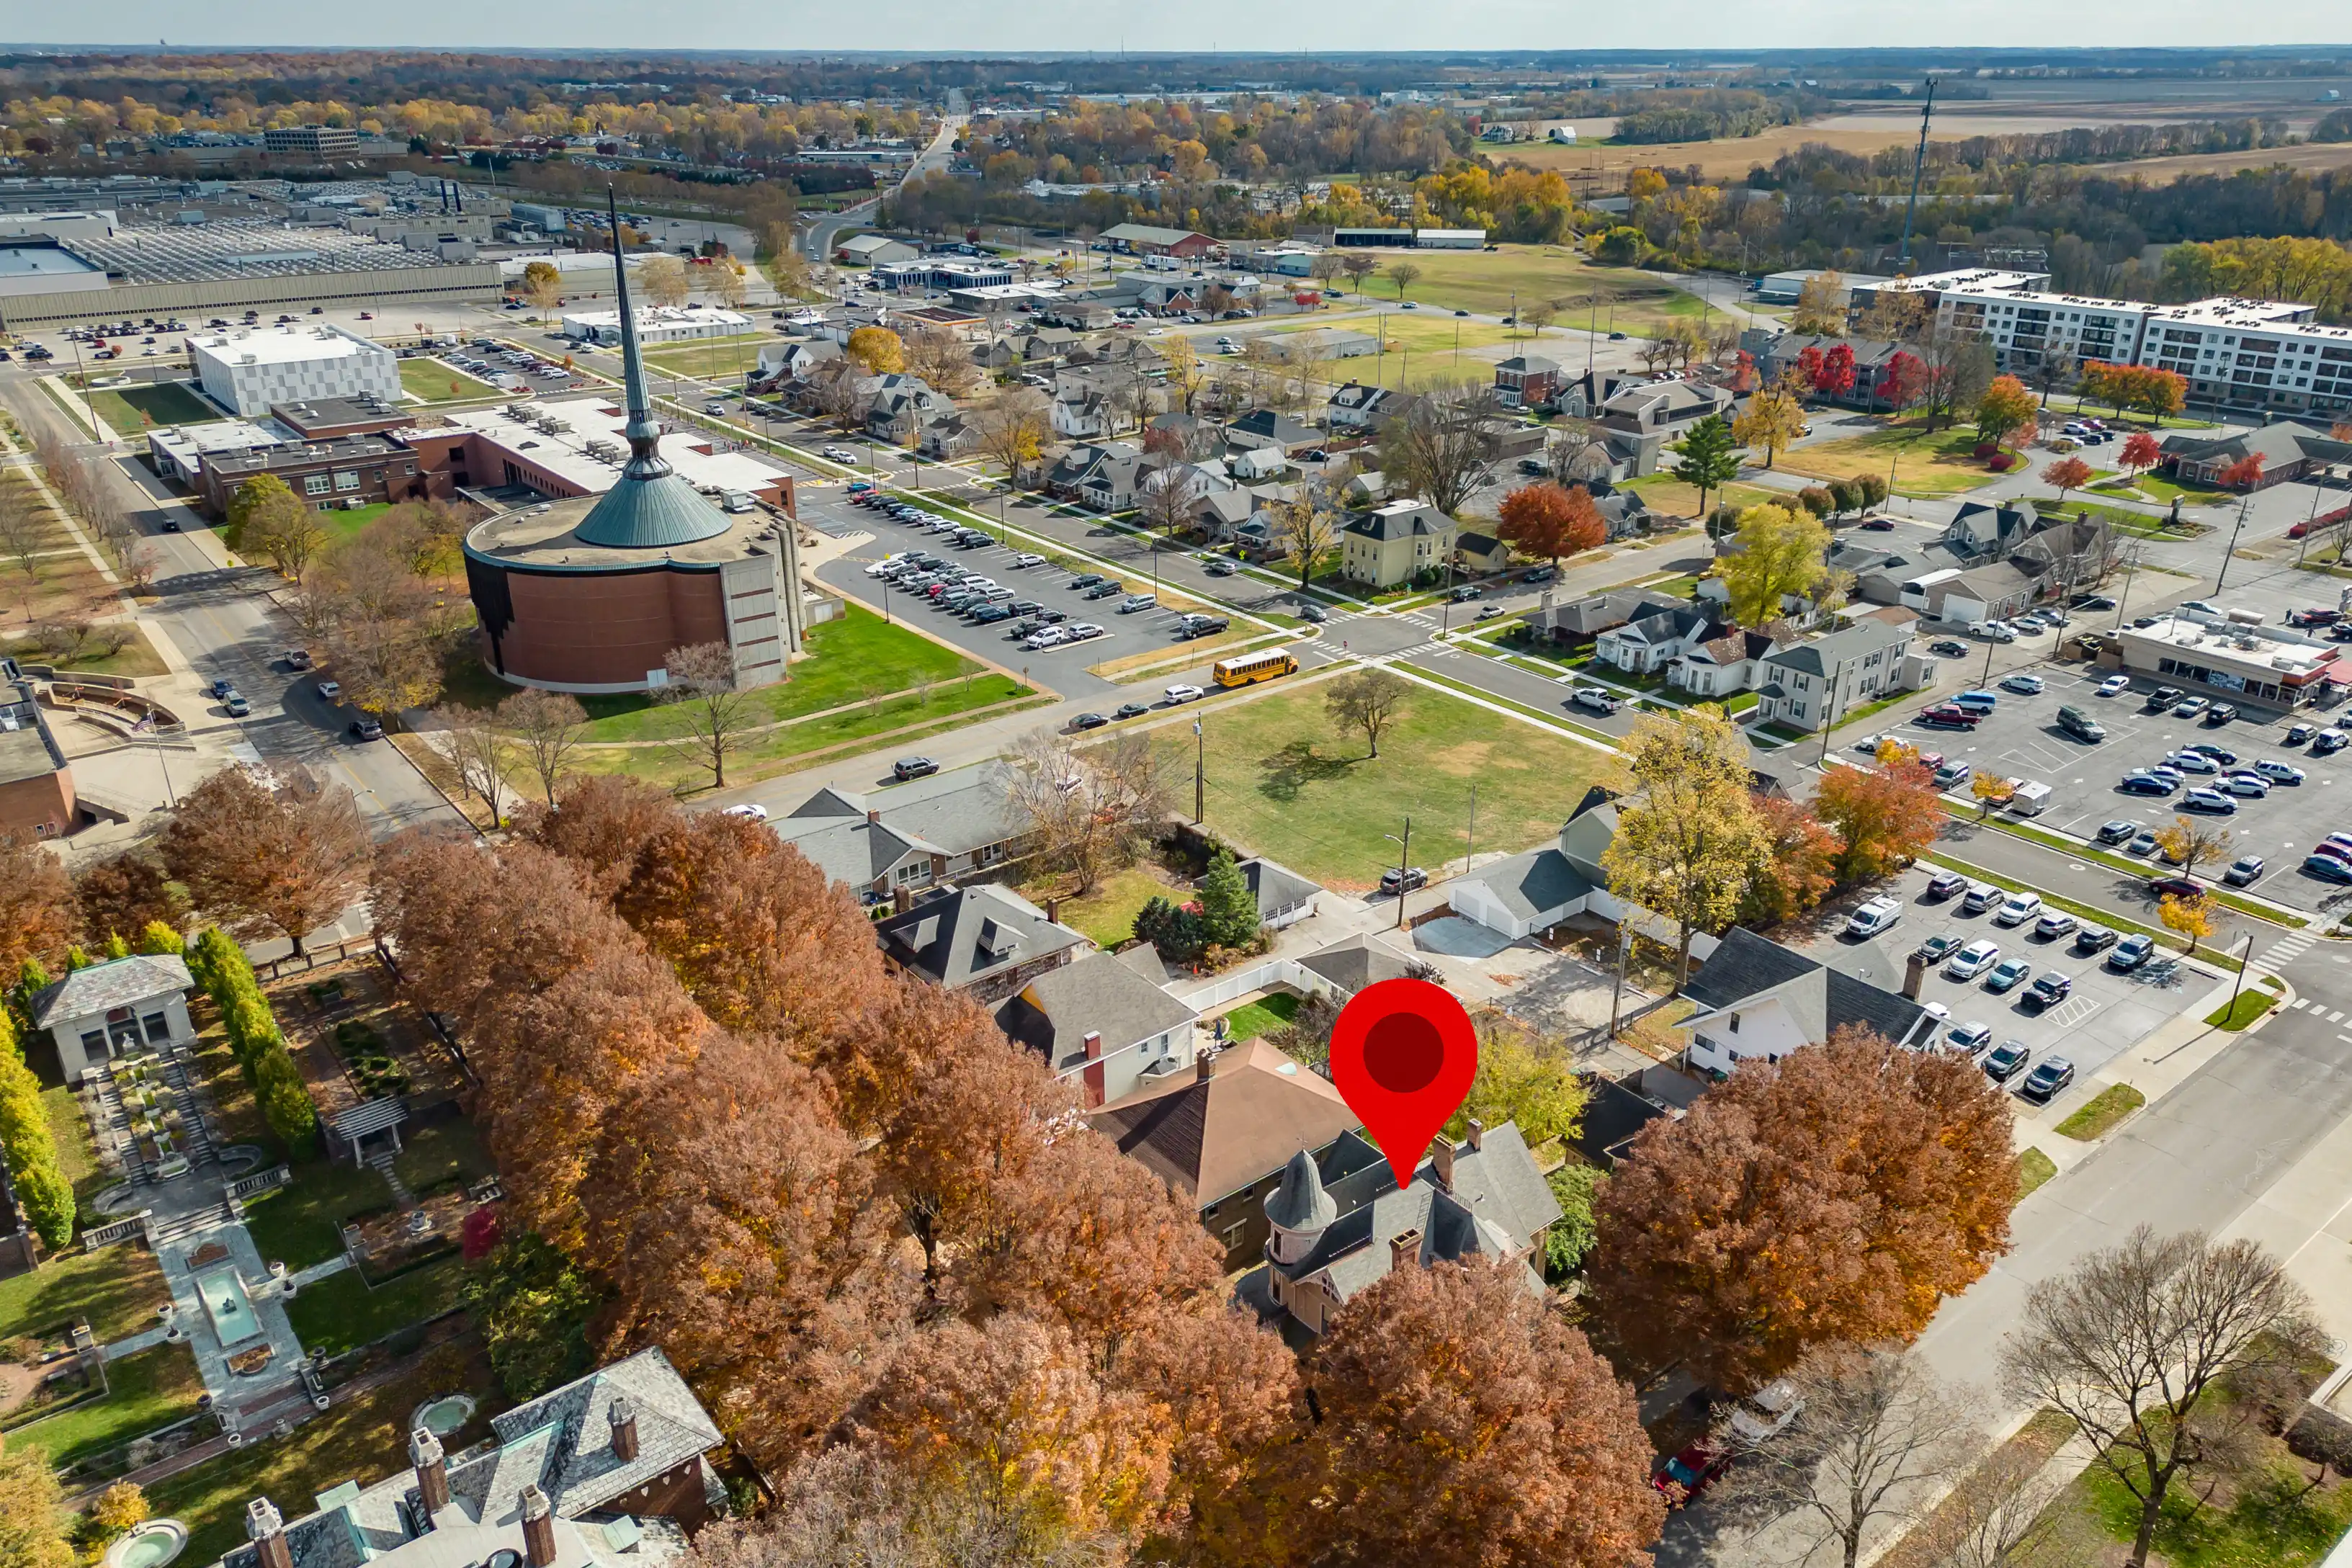 Aerial view of a suburban area with houses, trees showing autumn foliage, a round building with a spire, a red location marker over one of the houses, and a large parking area in the distance.